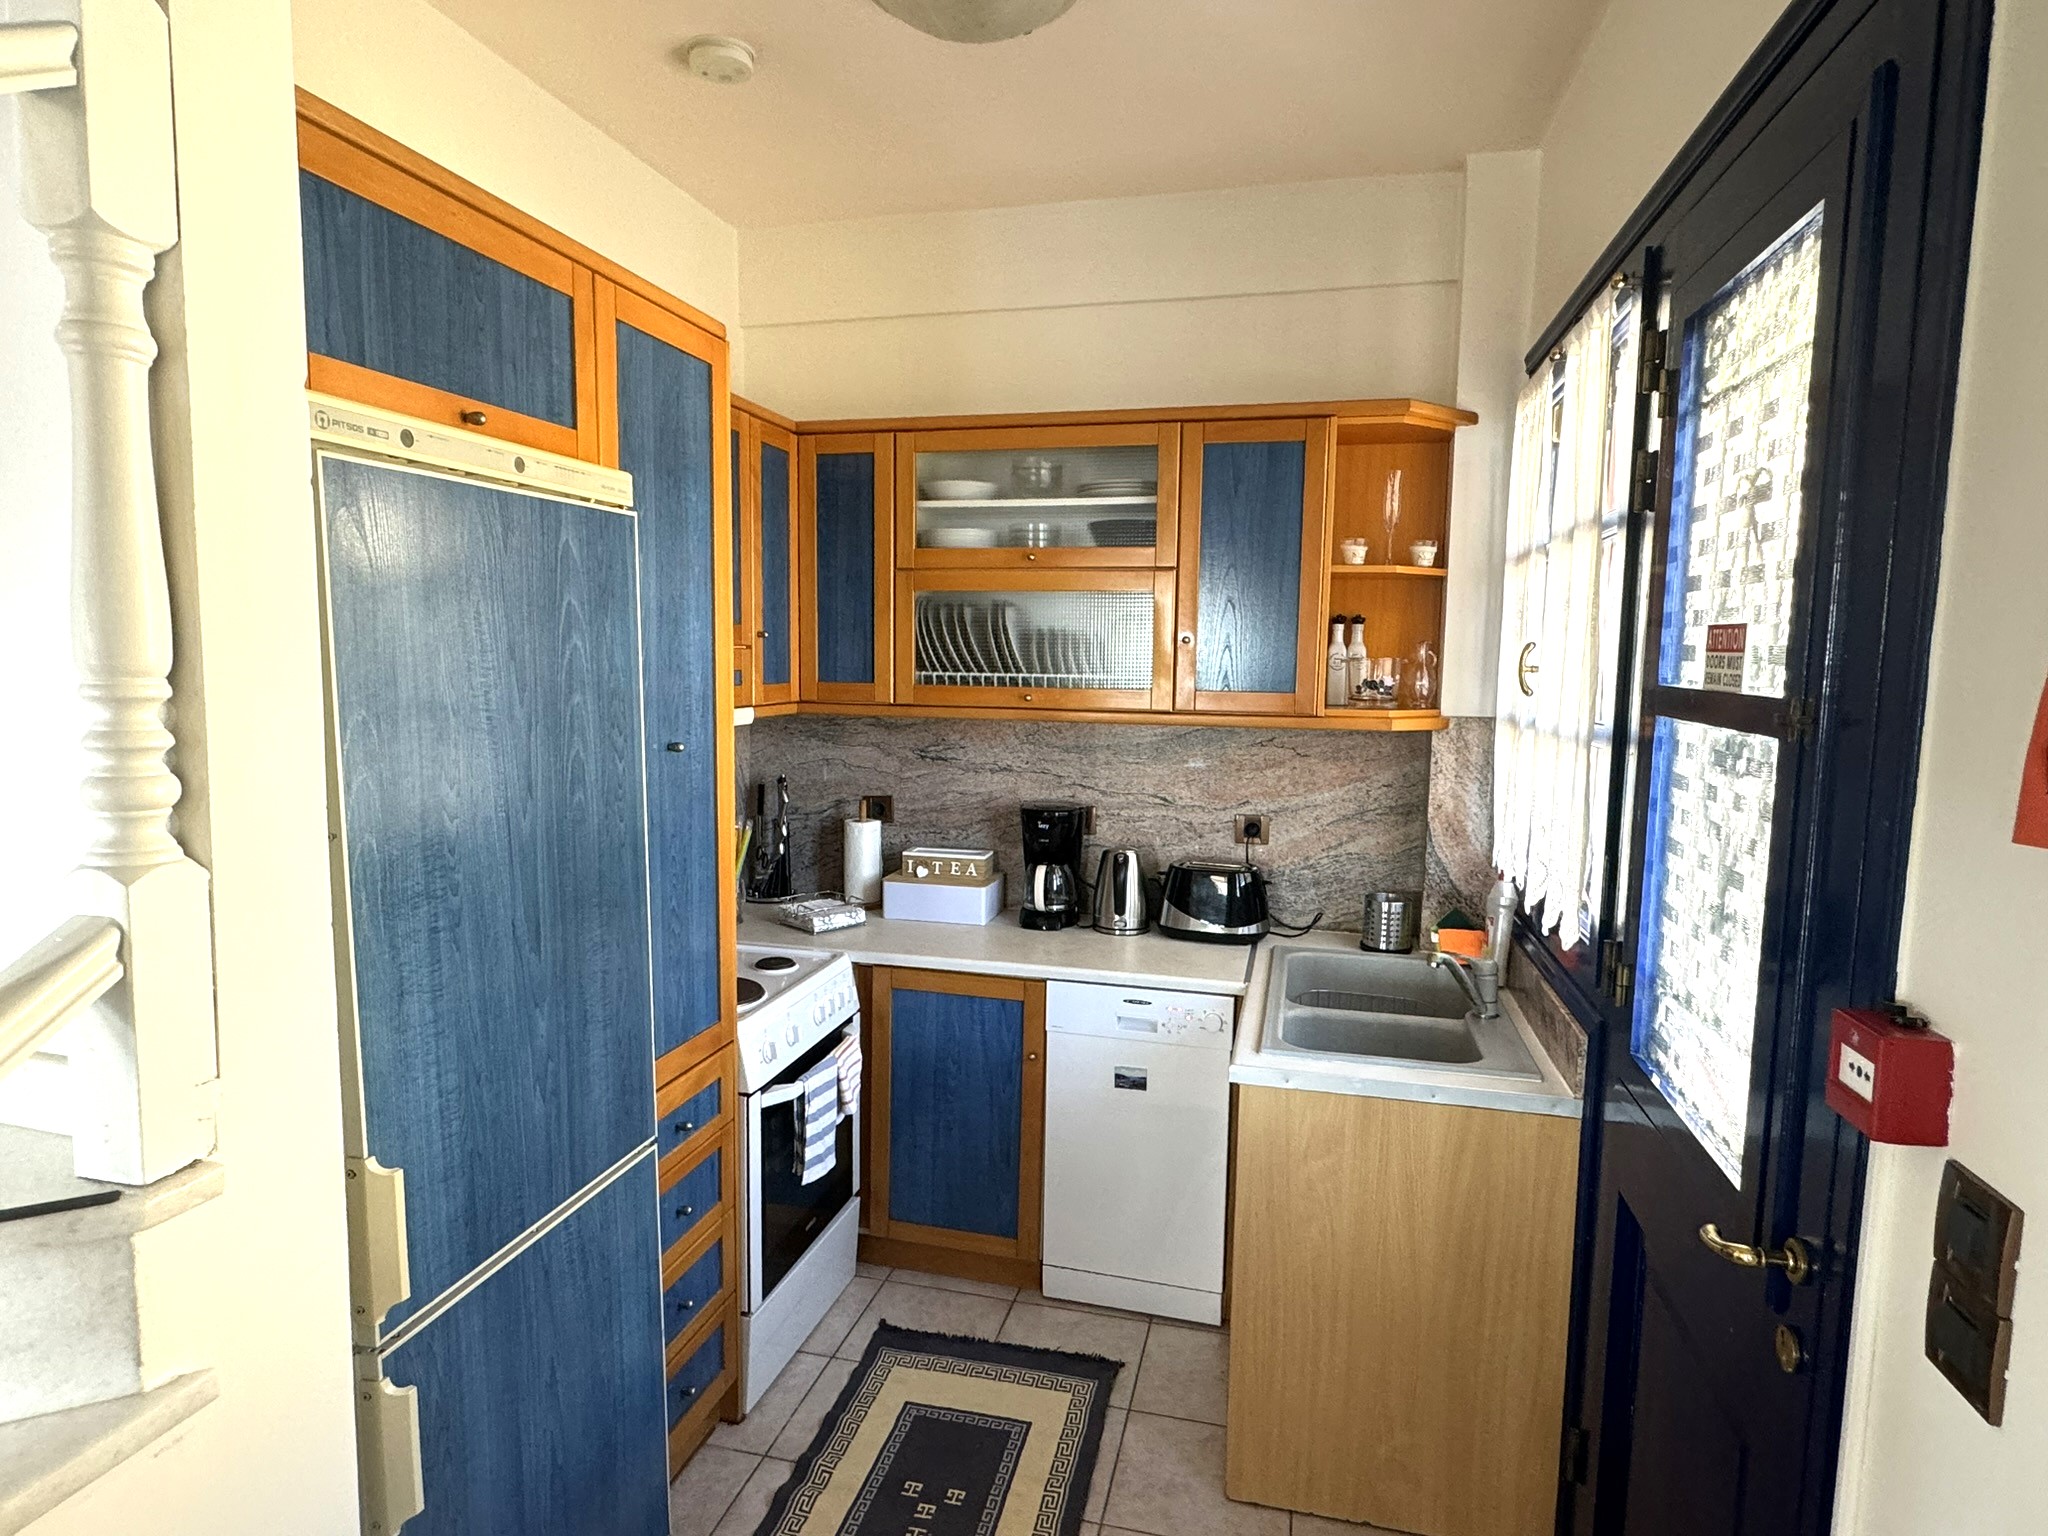 Kitchen of house for sale in Ithaca Greece Kioni